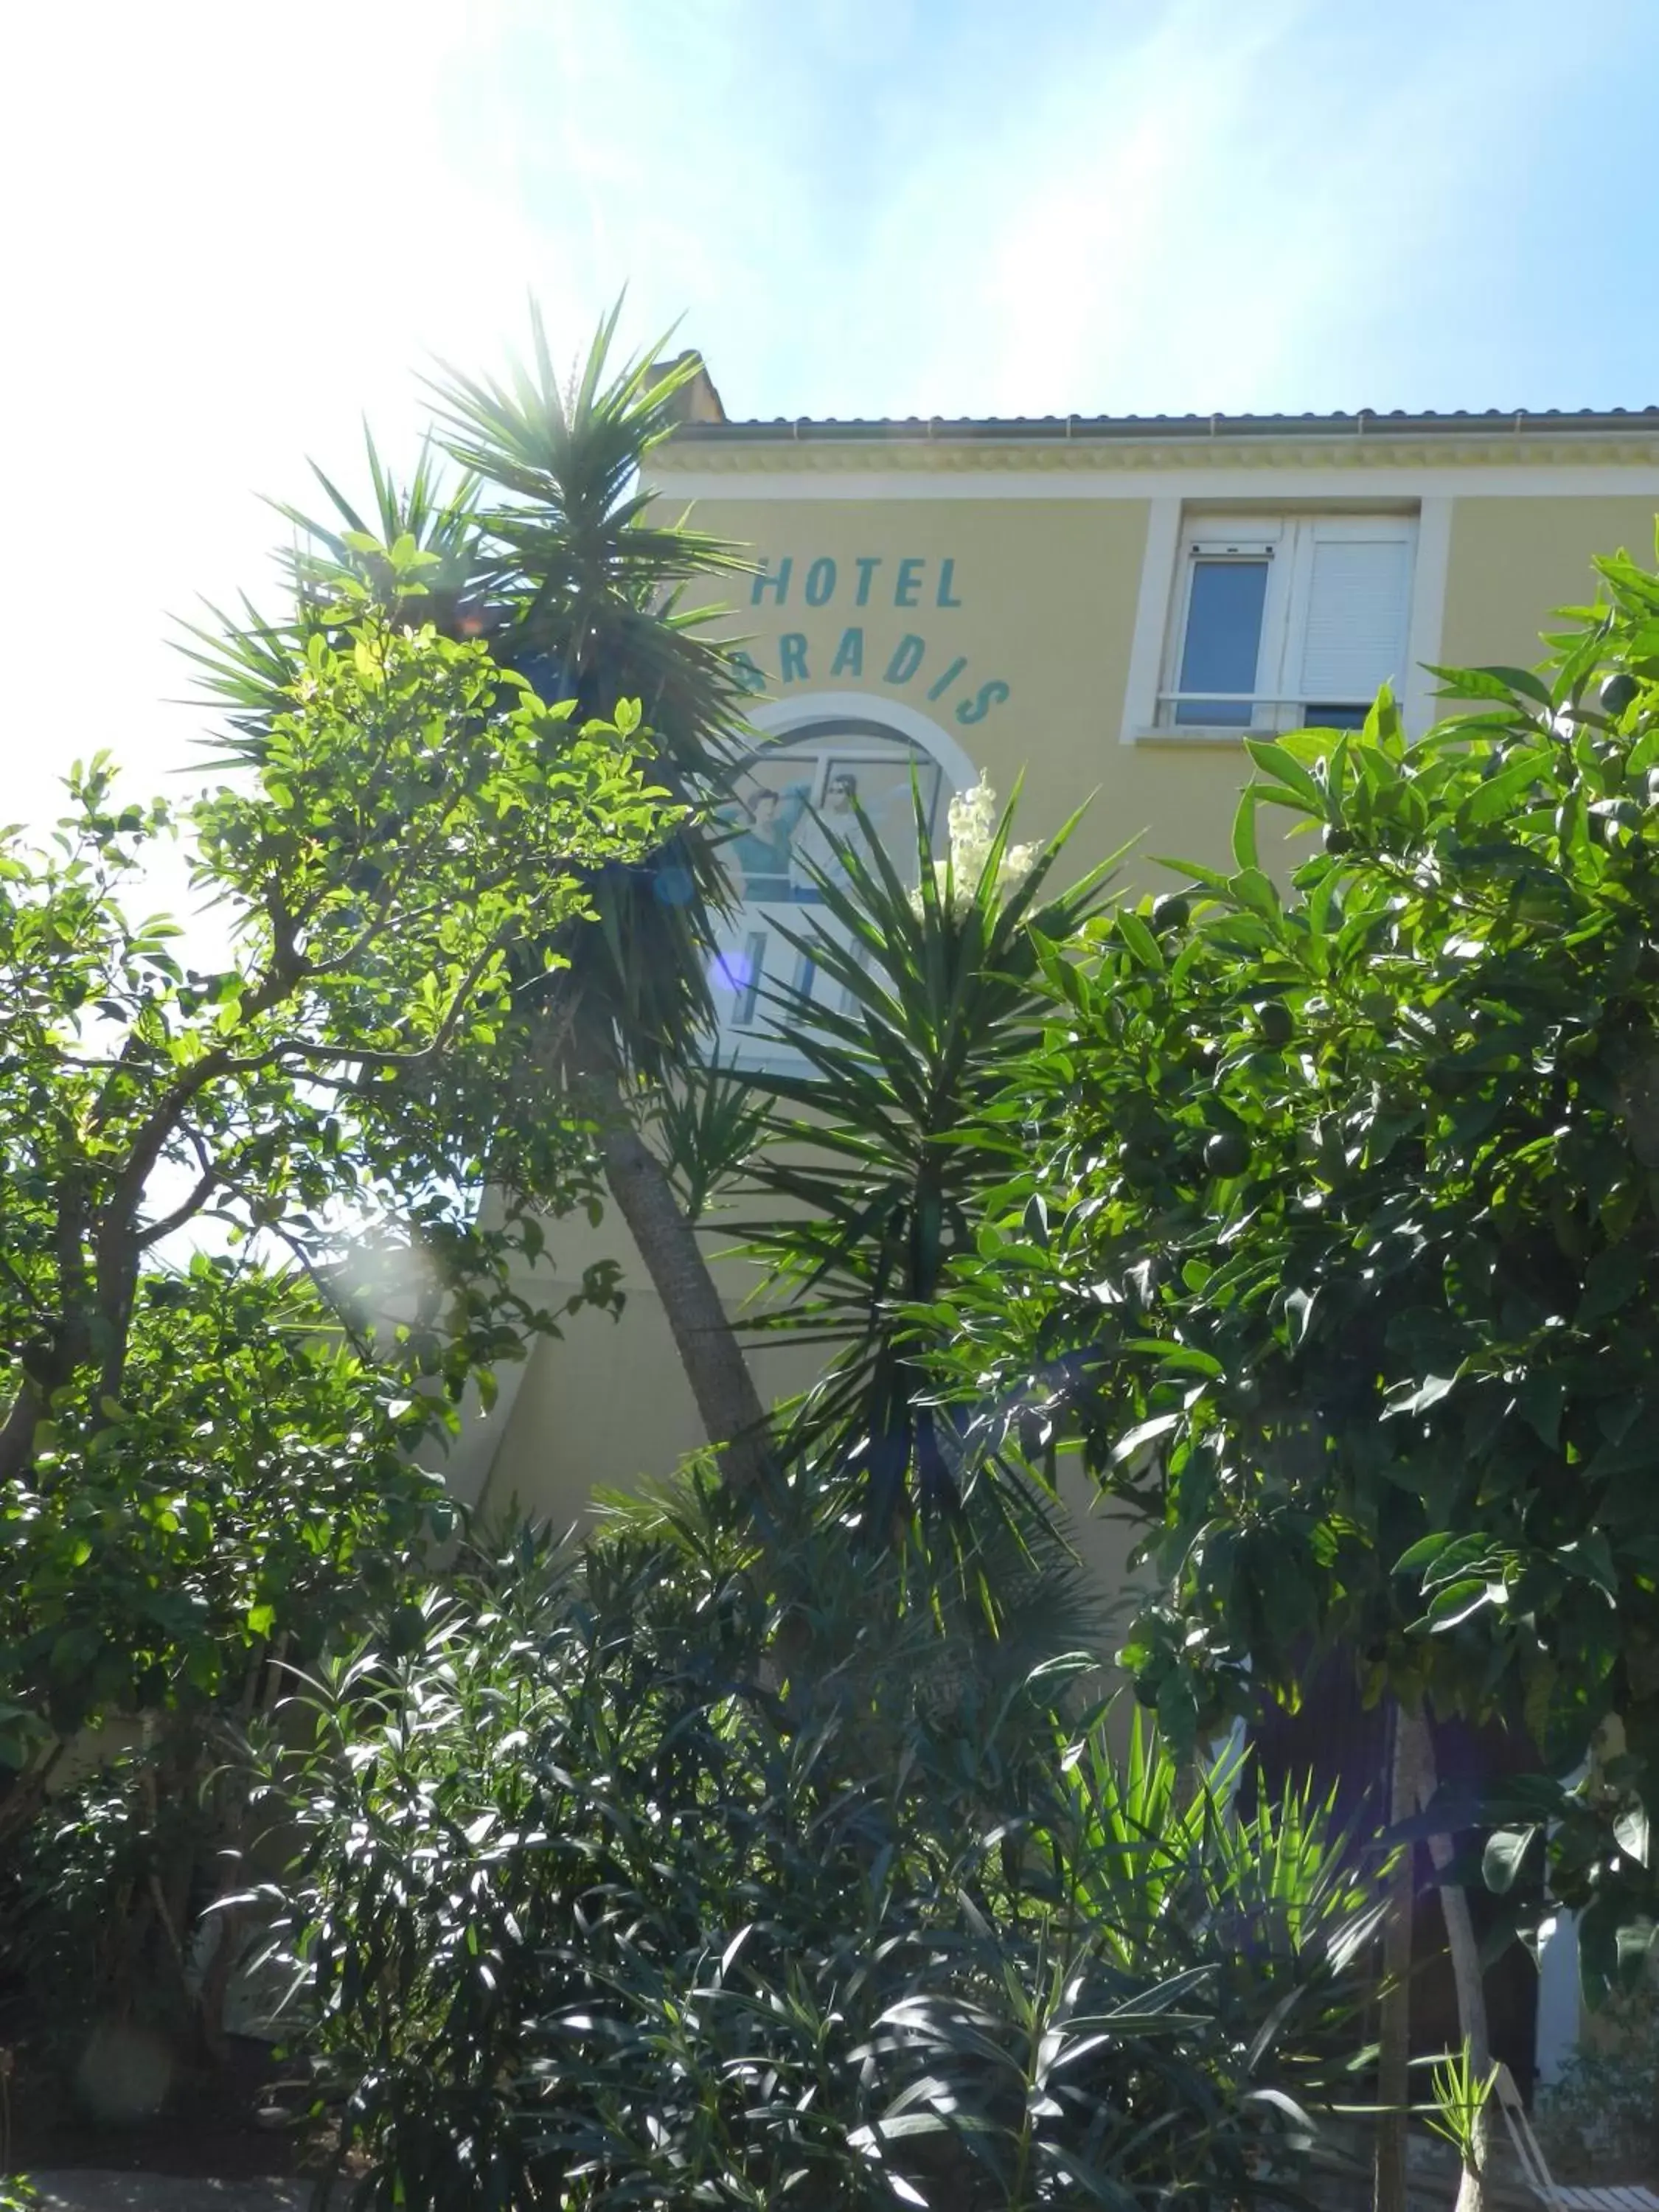 Area and facilities, Property Building in Hôtel Paradis